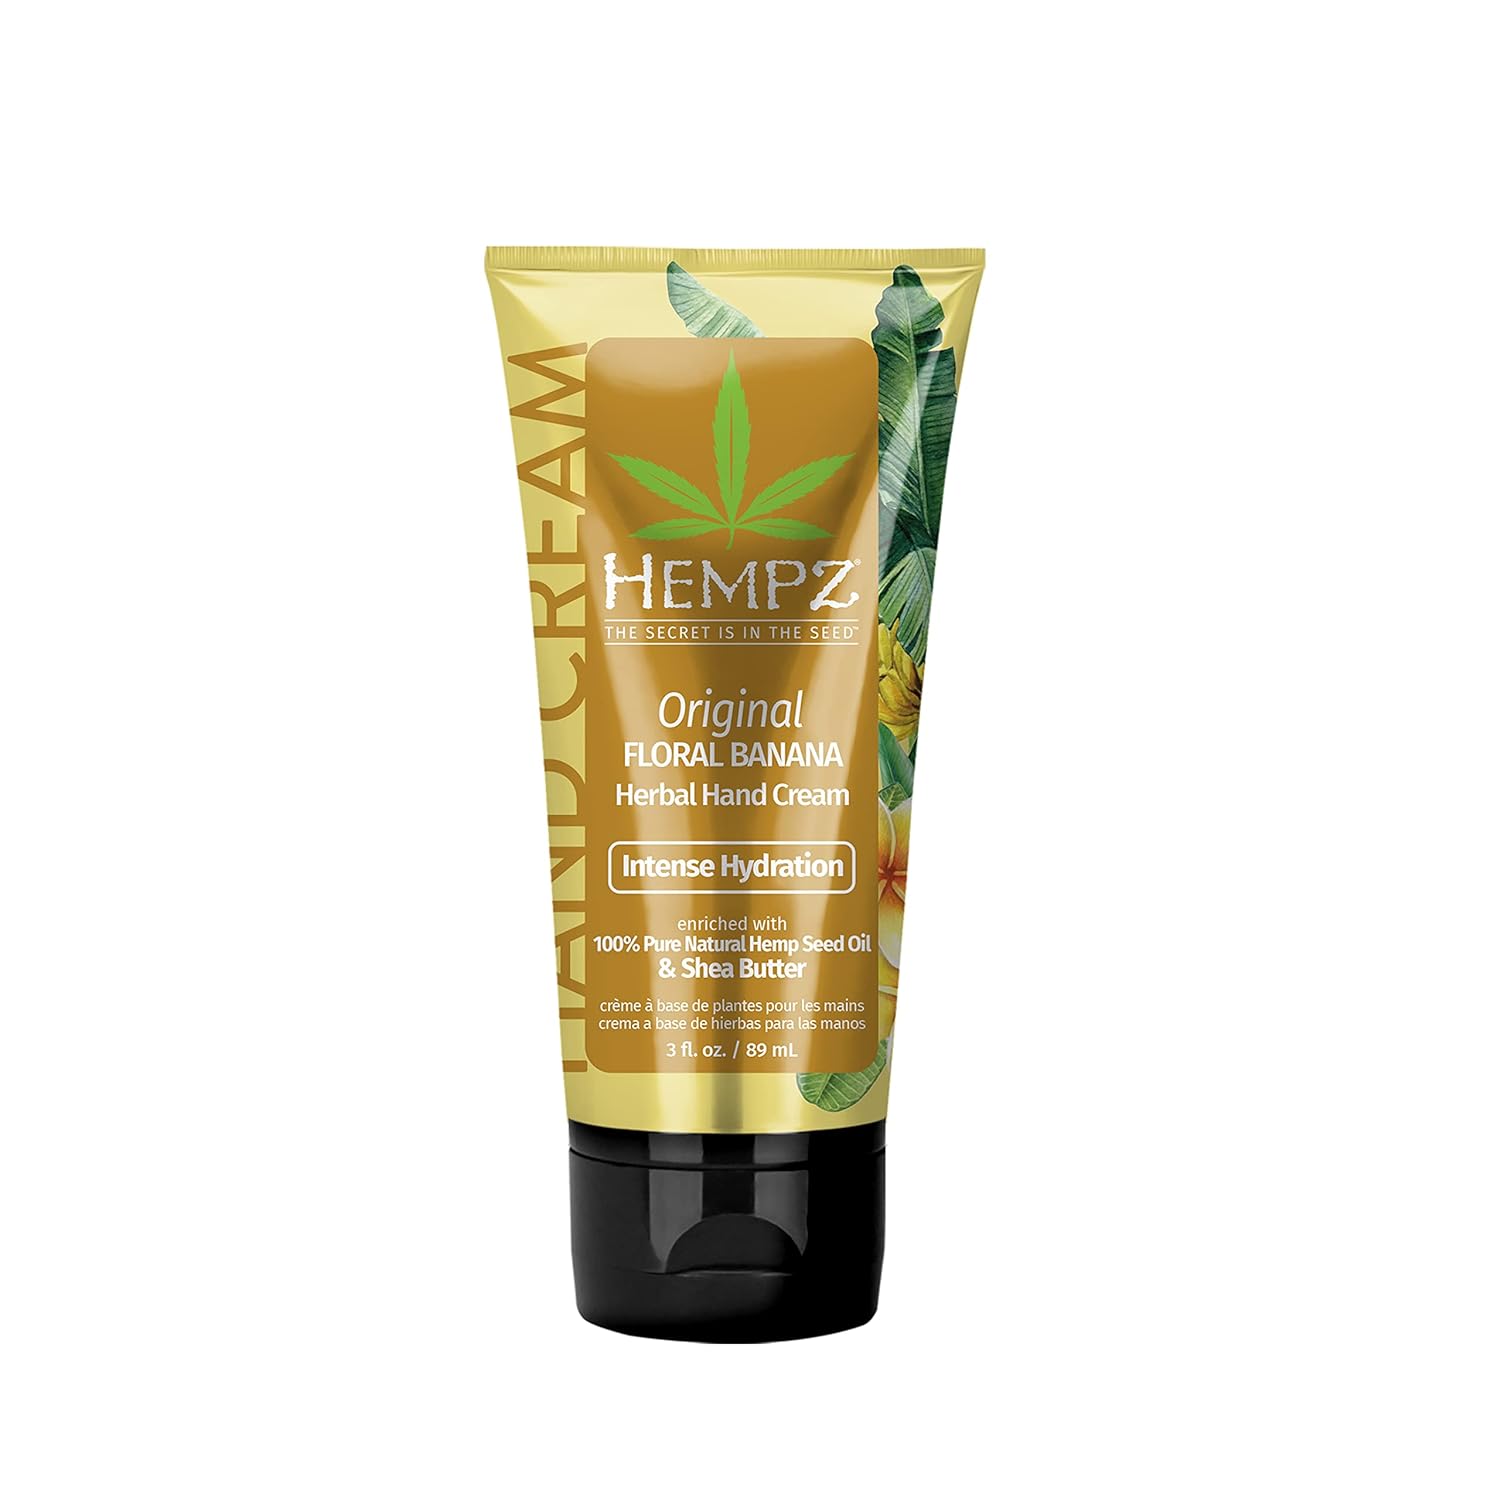 Hempz Daily Moisturizing Hand Cream for Dry, Cracked Hands - oral & Banana - Healing Non-Greasy Lotion Repair Creme with Shea Butter, Women & Men Skin Care Products - 3